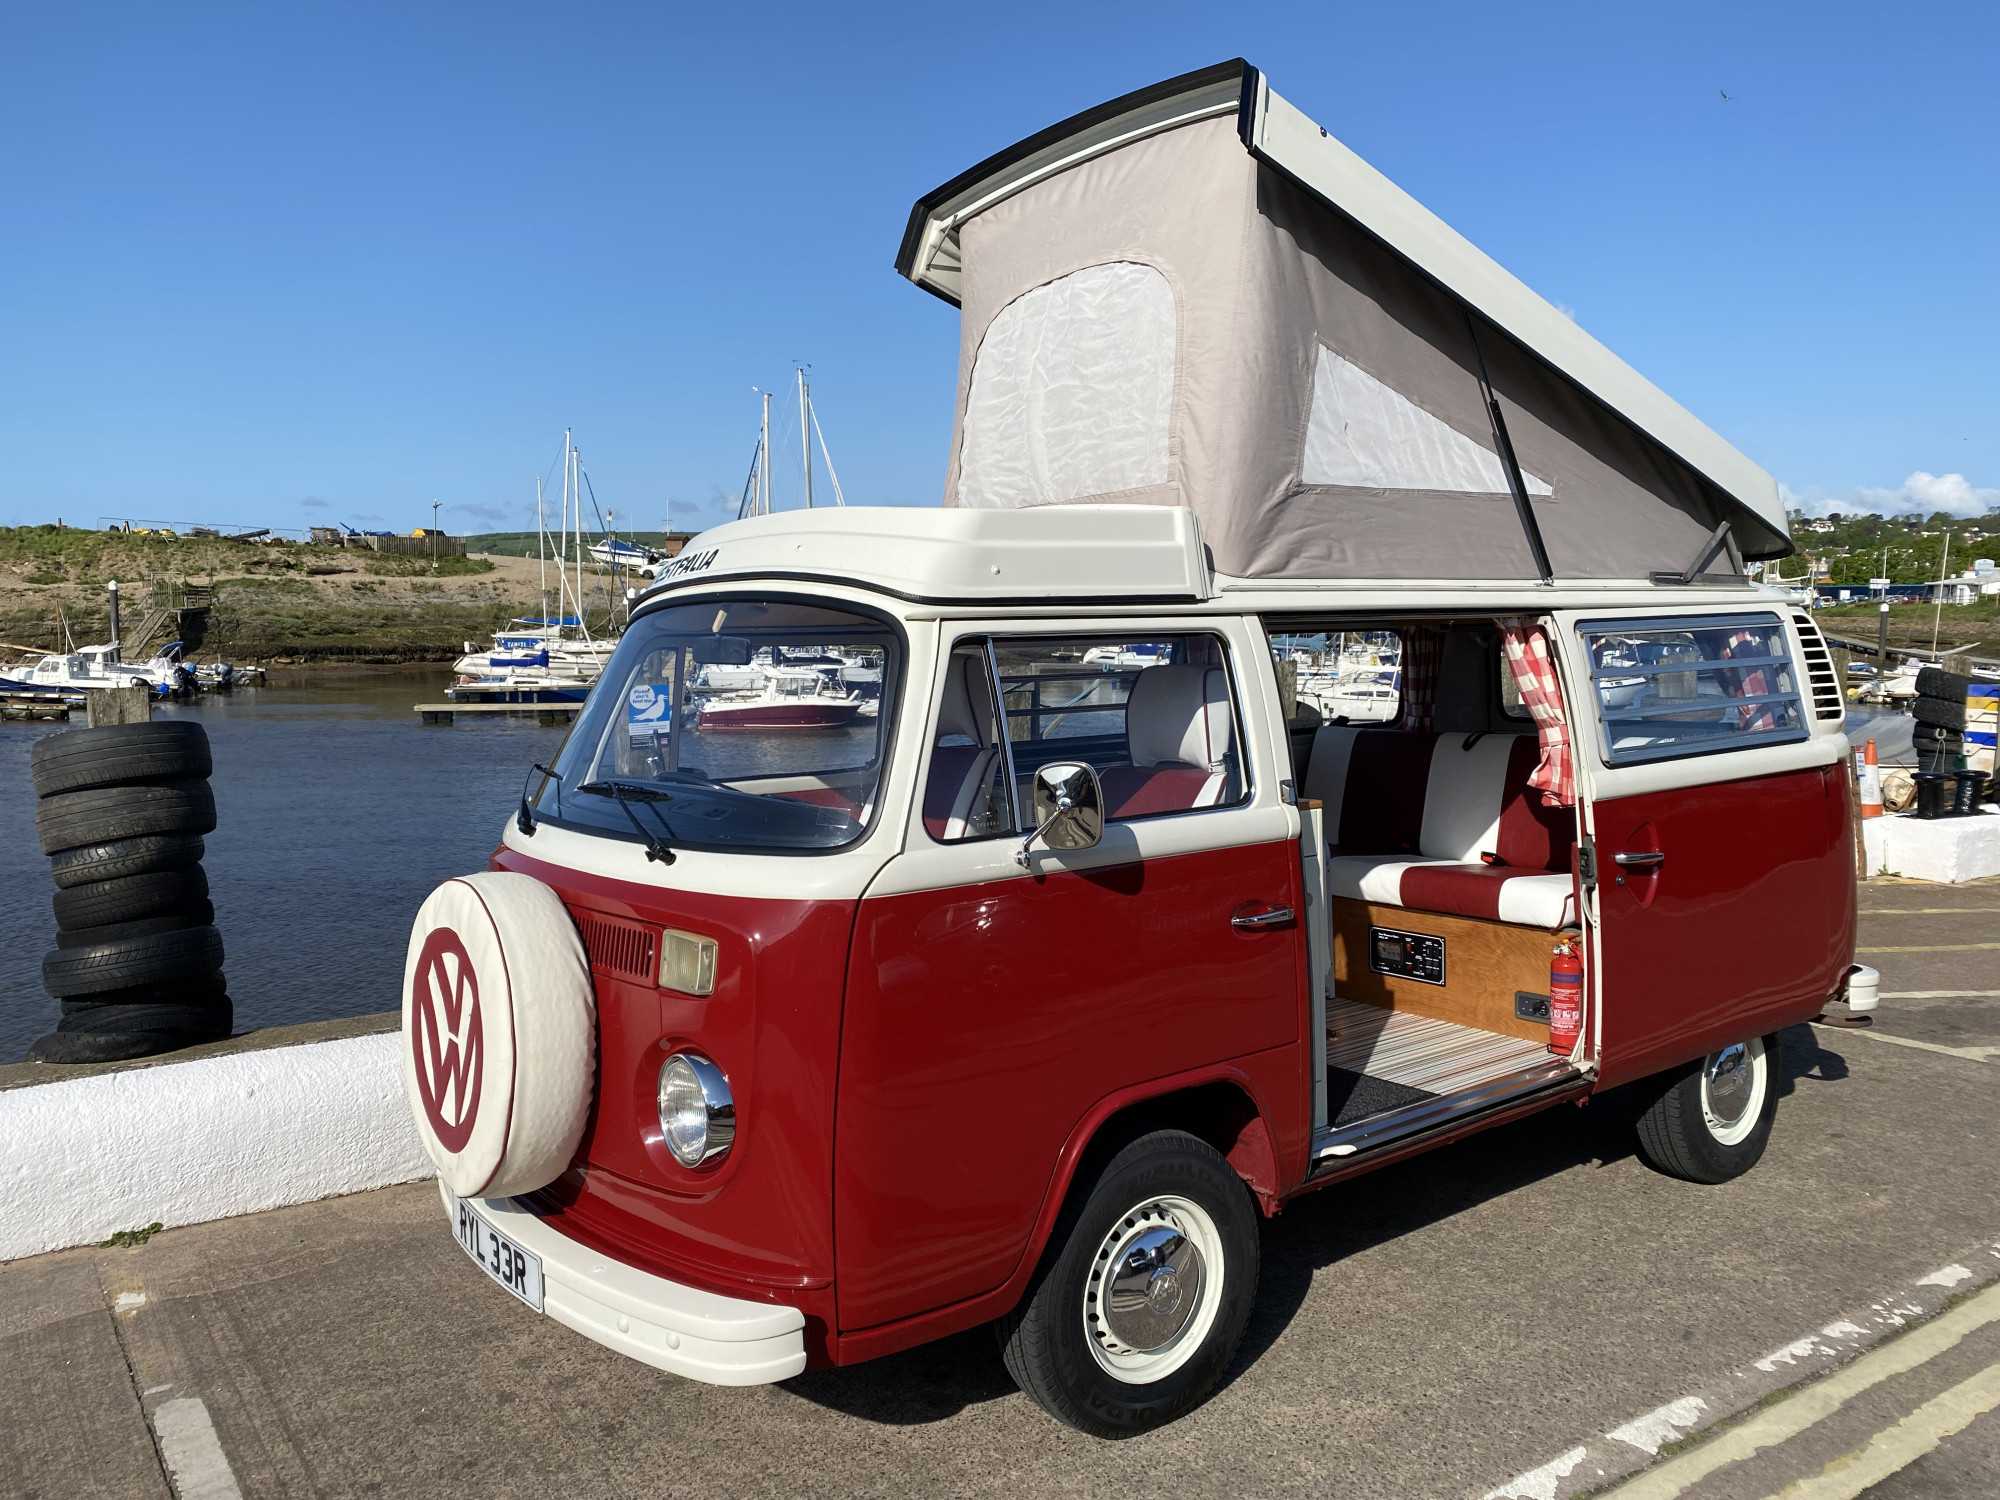 A VW T2 Classic Campervan called Ruby-Rose and VW Campervan Ruby Rose in Devon for hire in Colyton, England